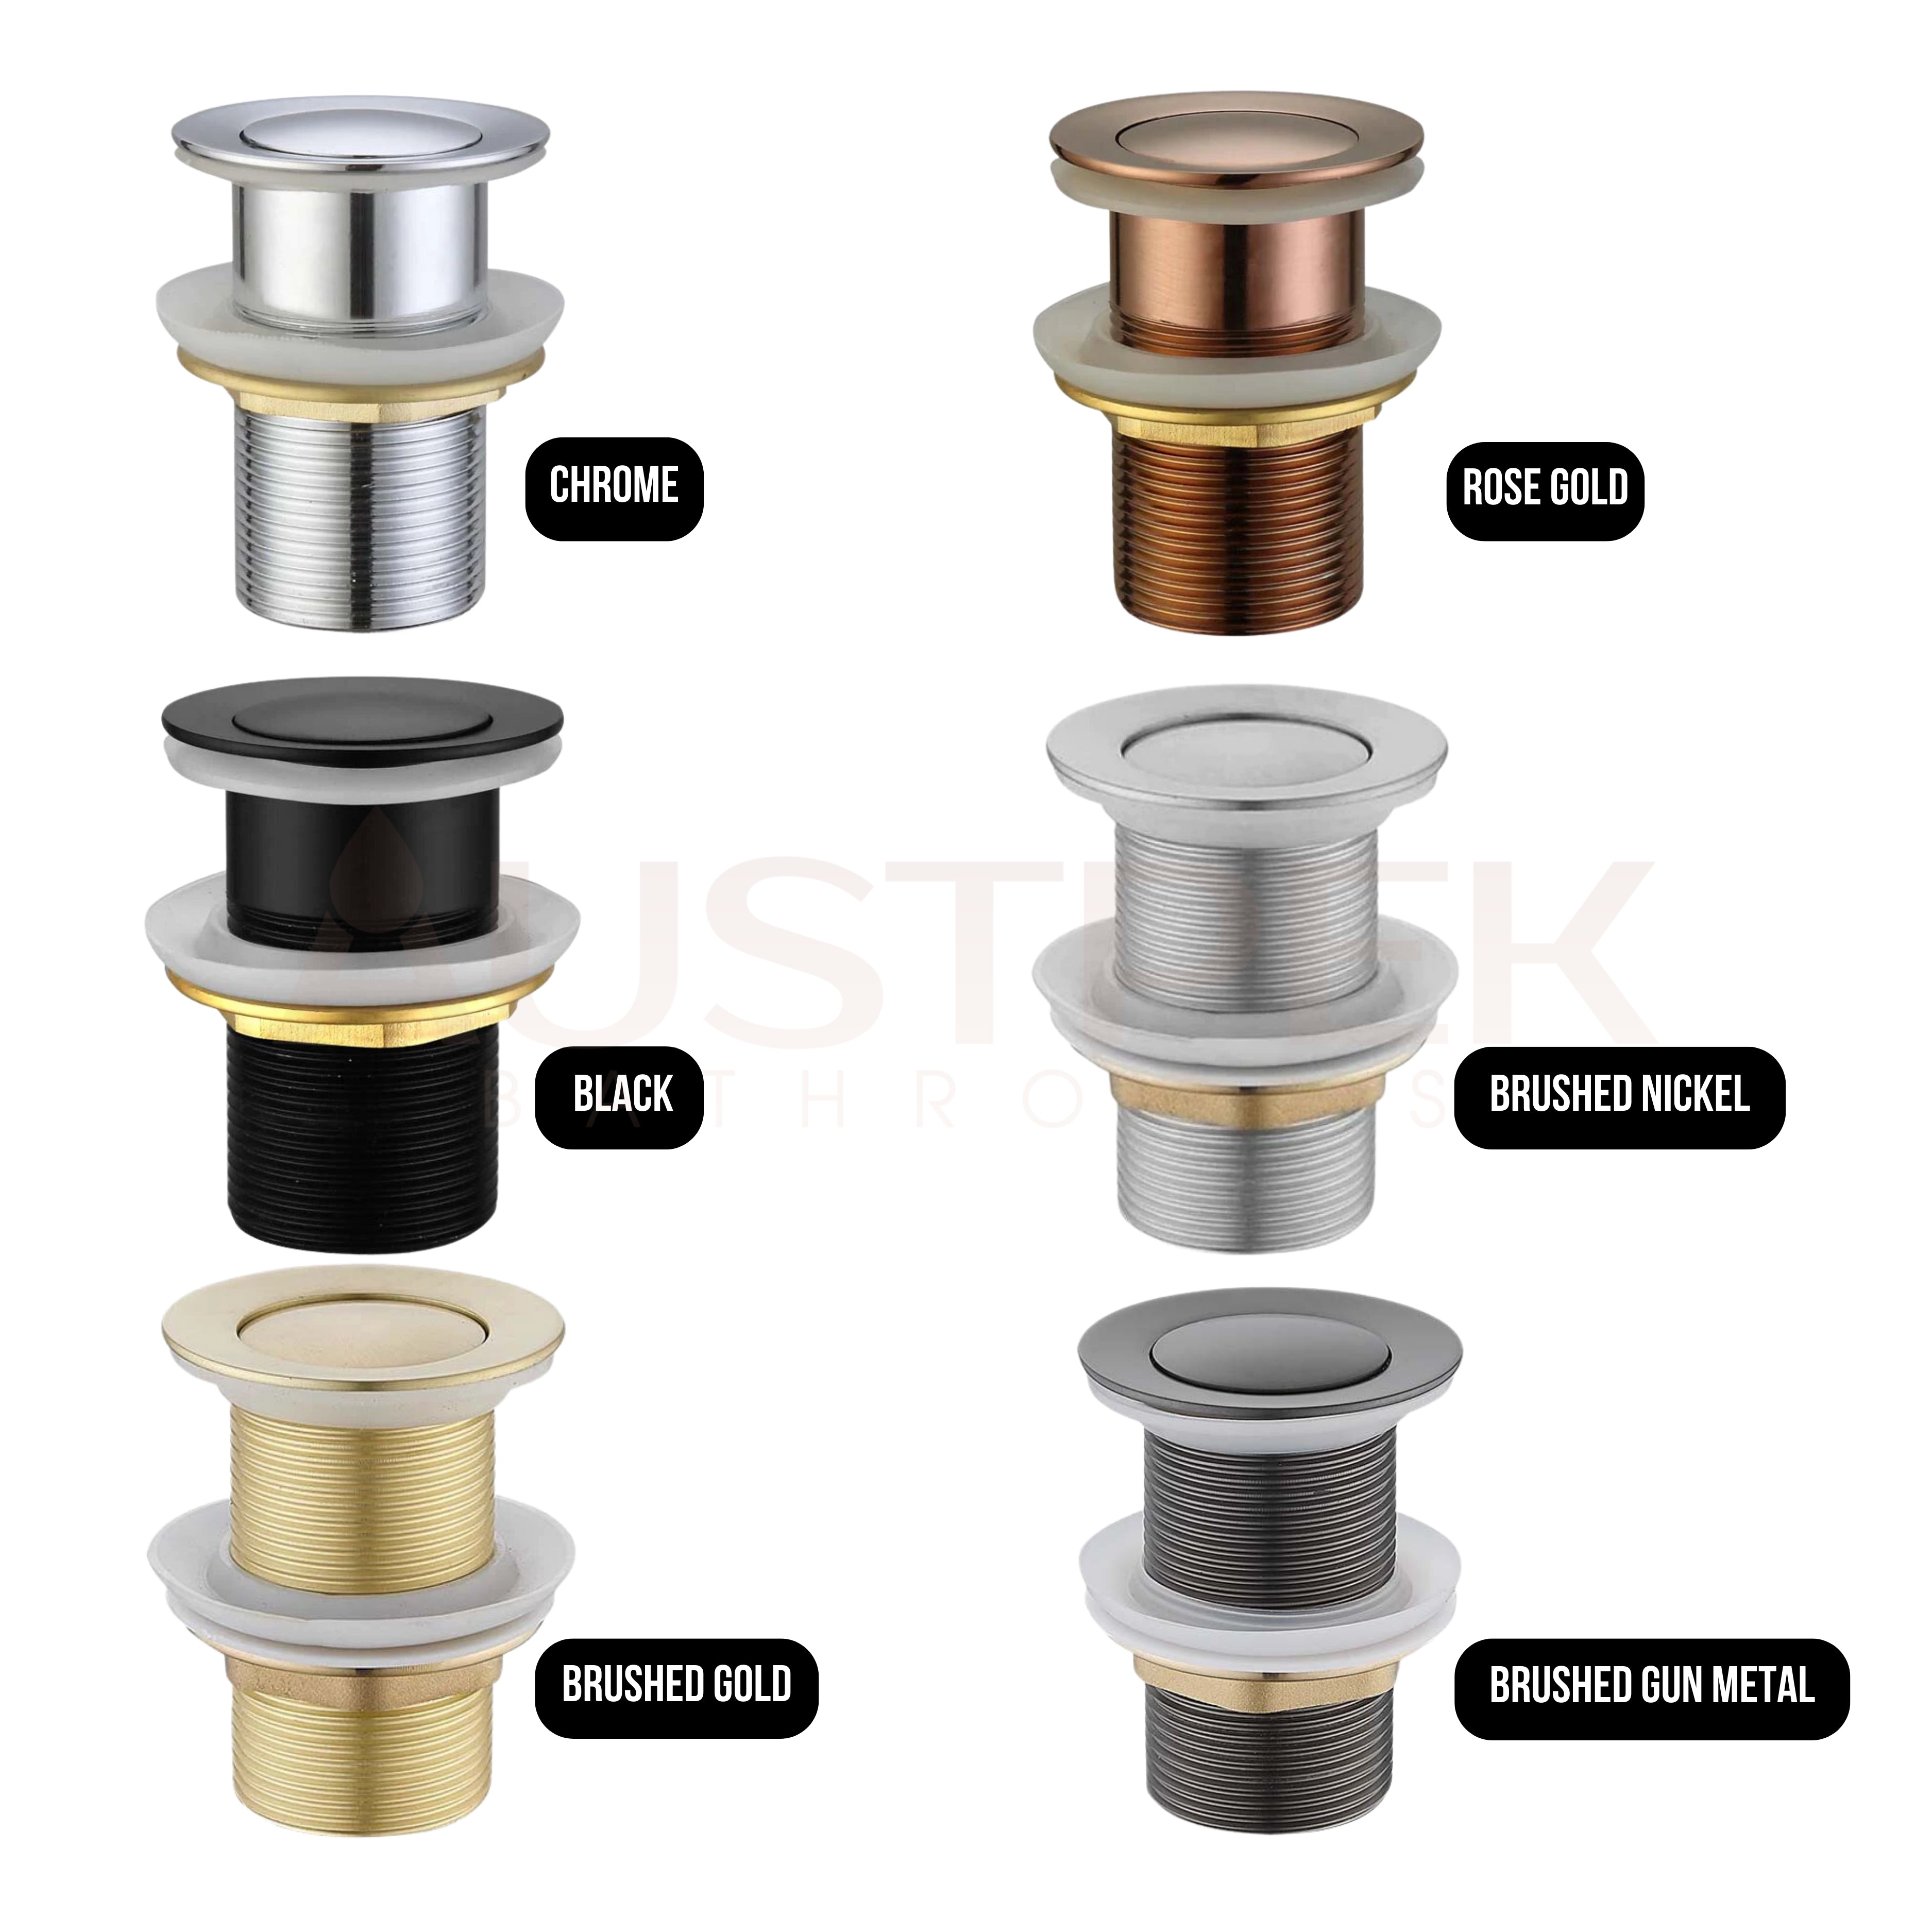 HELLYCAR PUSH PLUG WASTE NON-OVERFLOW ROSE GOLD 32MM